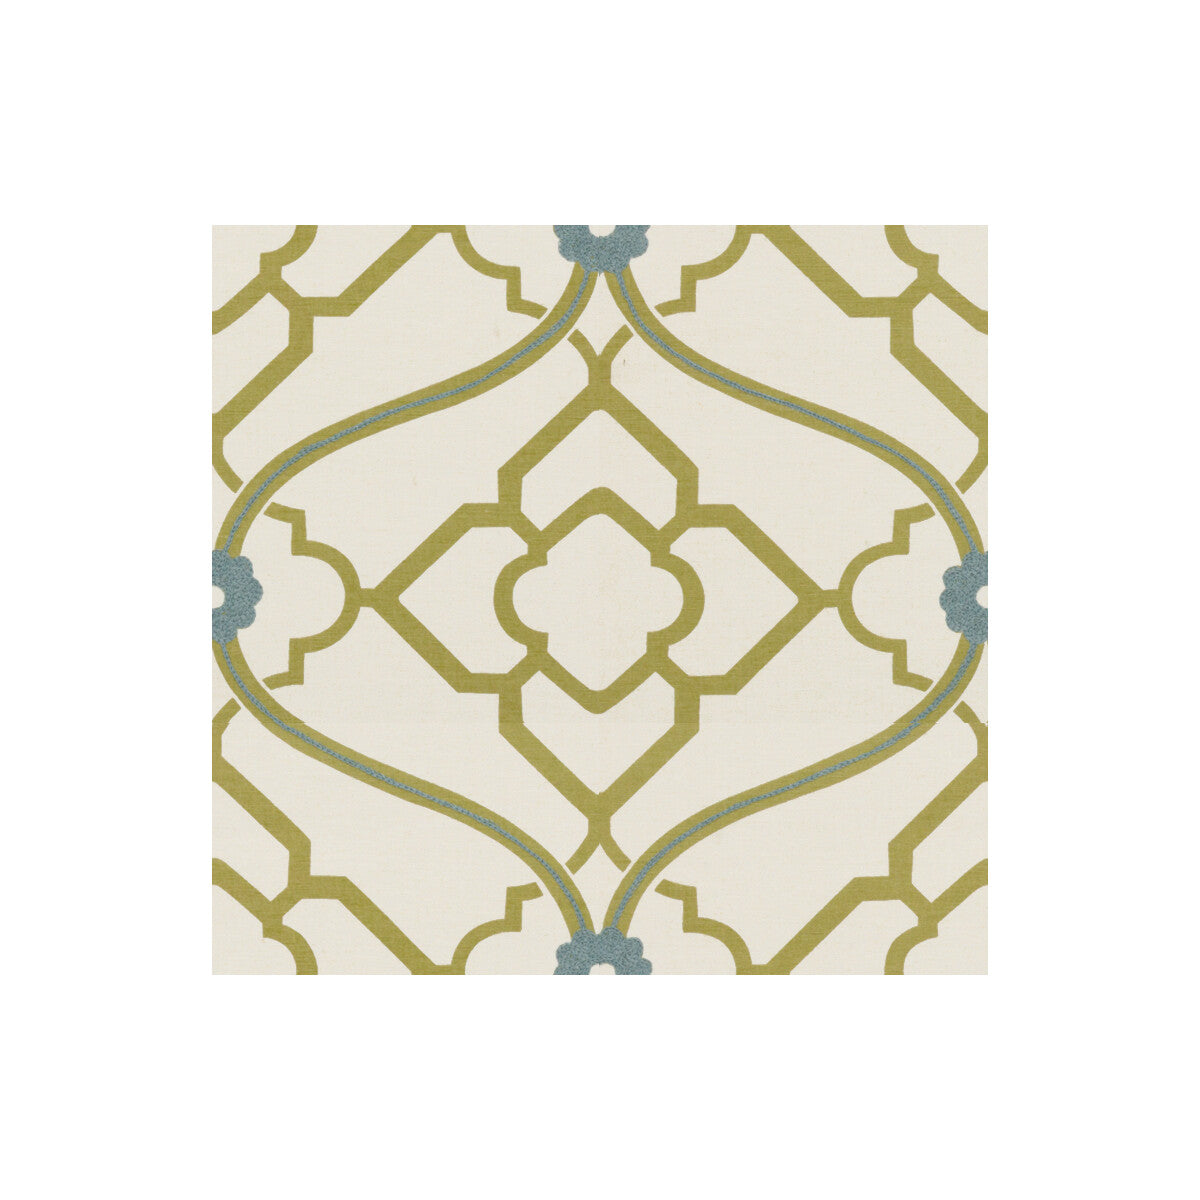 Zuma fabric in kiwi color - pattern ZUMA.135.0 - by Kravet Design in the Candice Olson collection